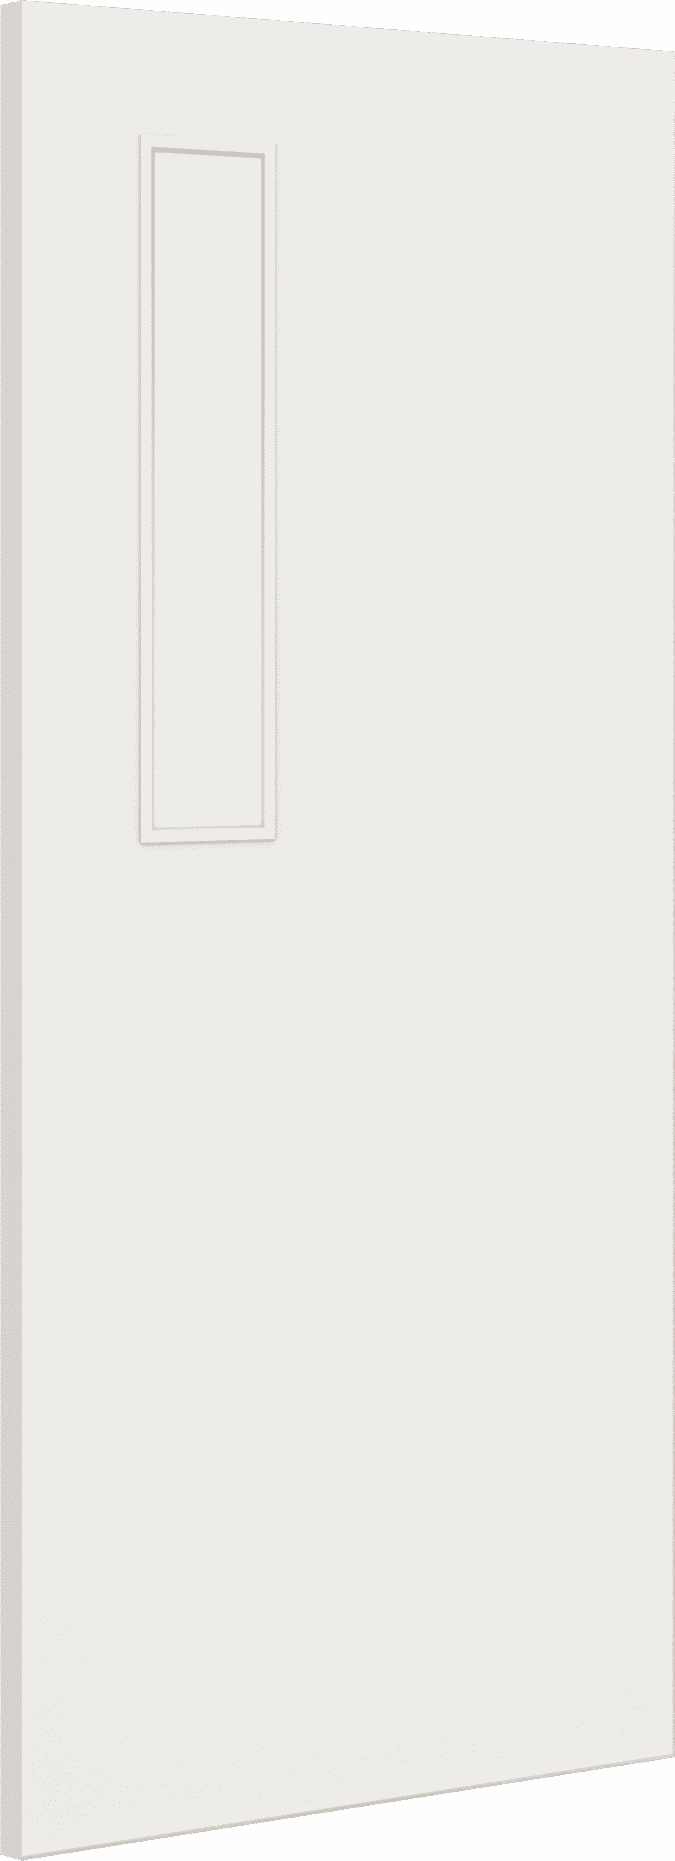 2040mm x 726mm x 44mm Architectural Paint Grade White 08 Clear Glazed Fire Door Blank